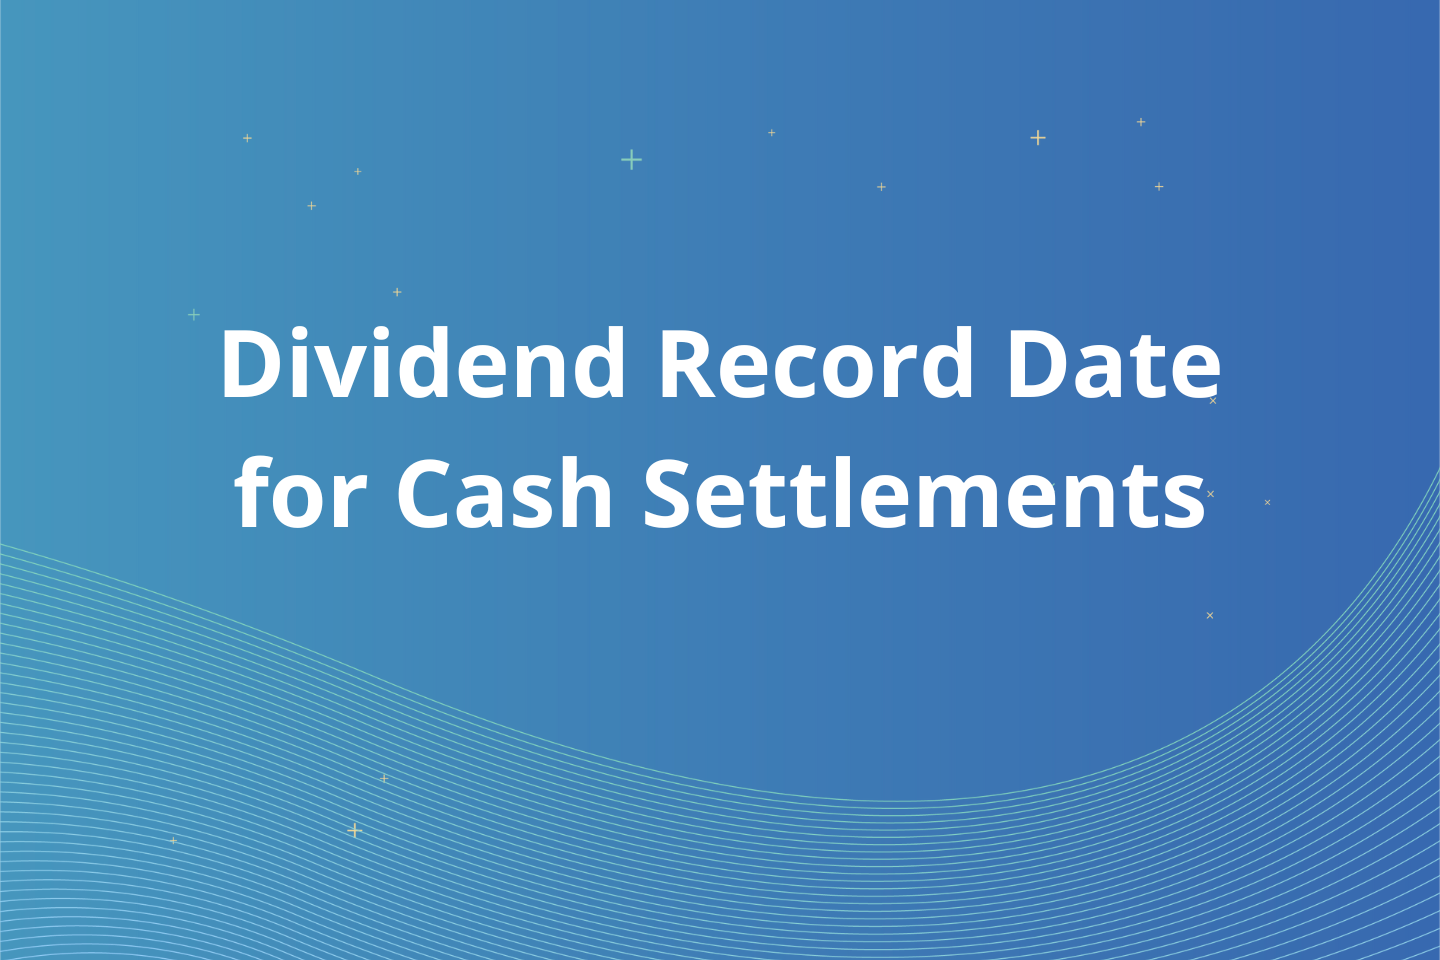 Test Traps: What’s the Dividend Record Date for a Cash Settlement?